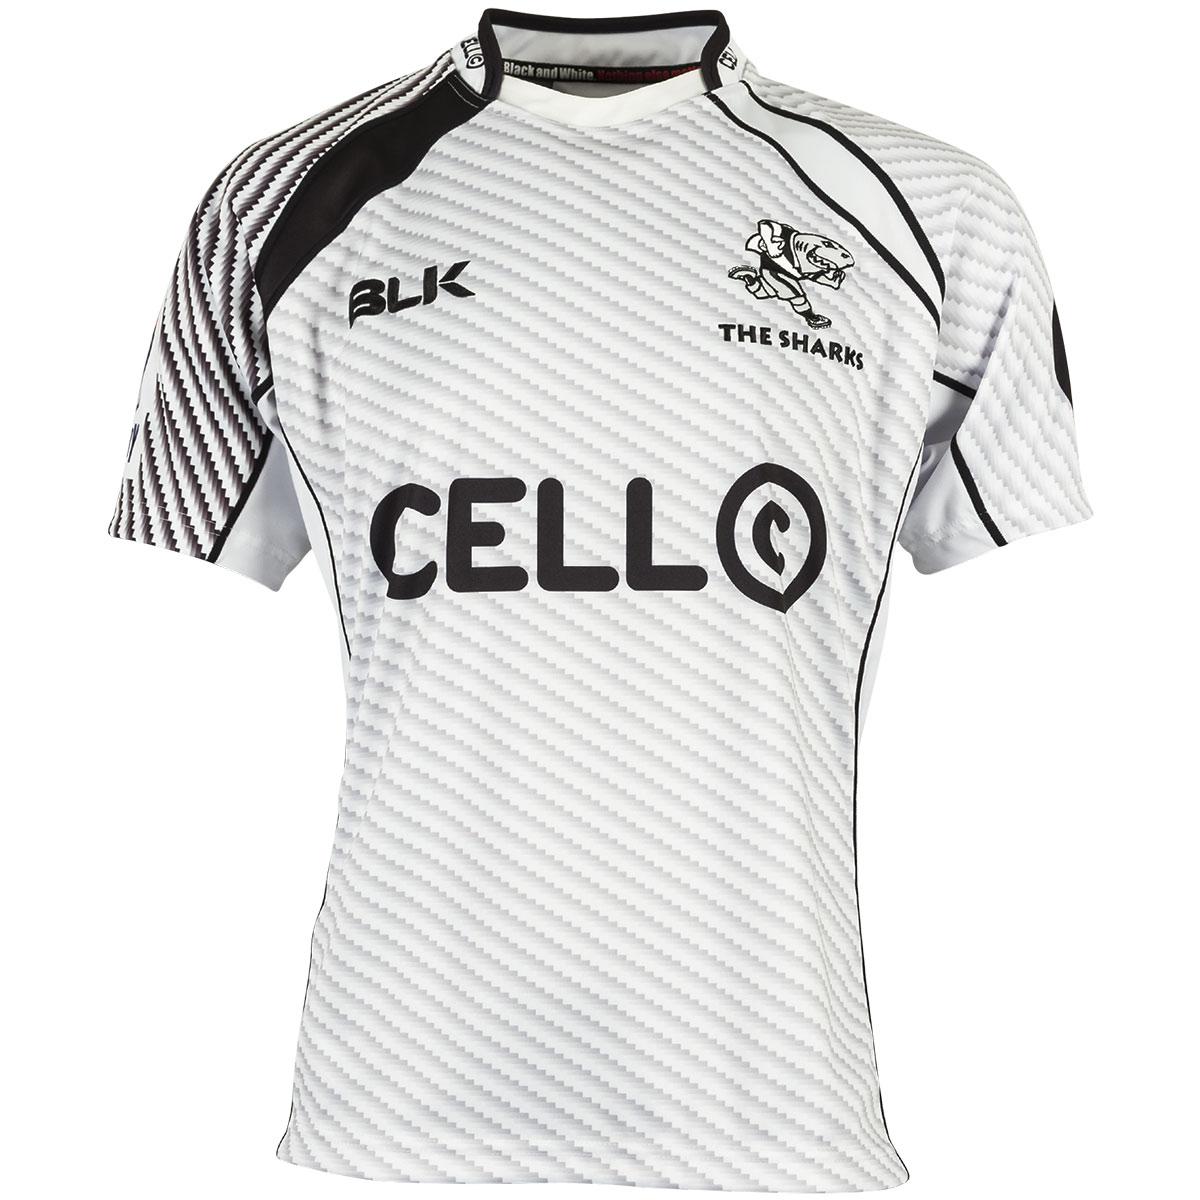 cell c sharks jersey